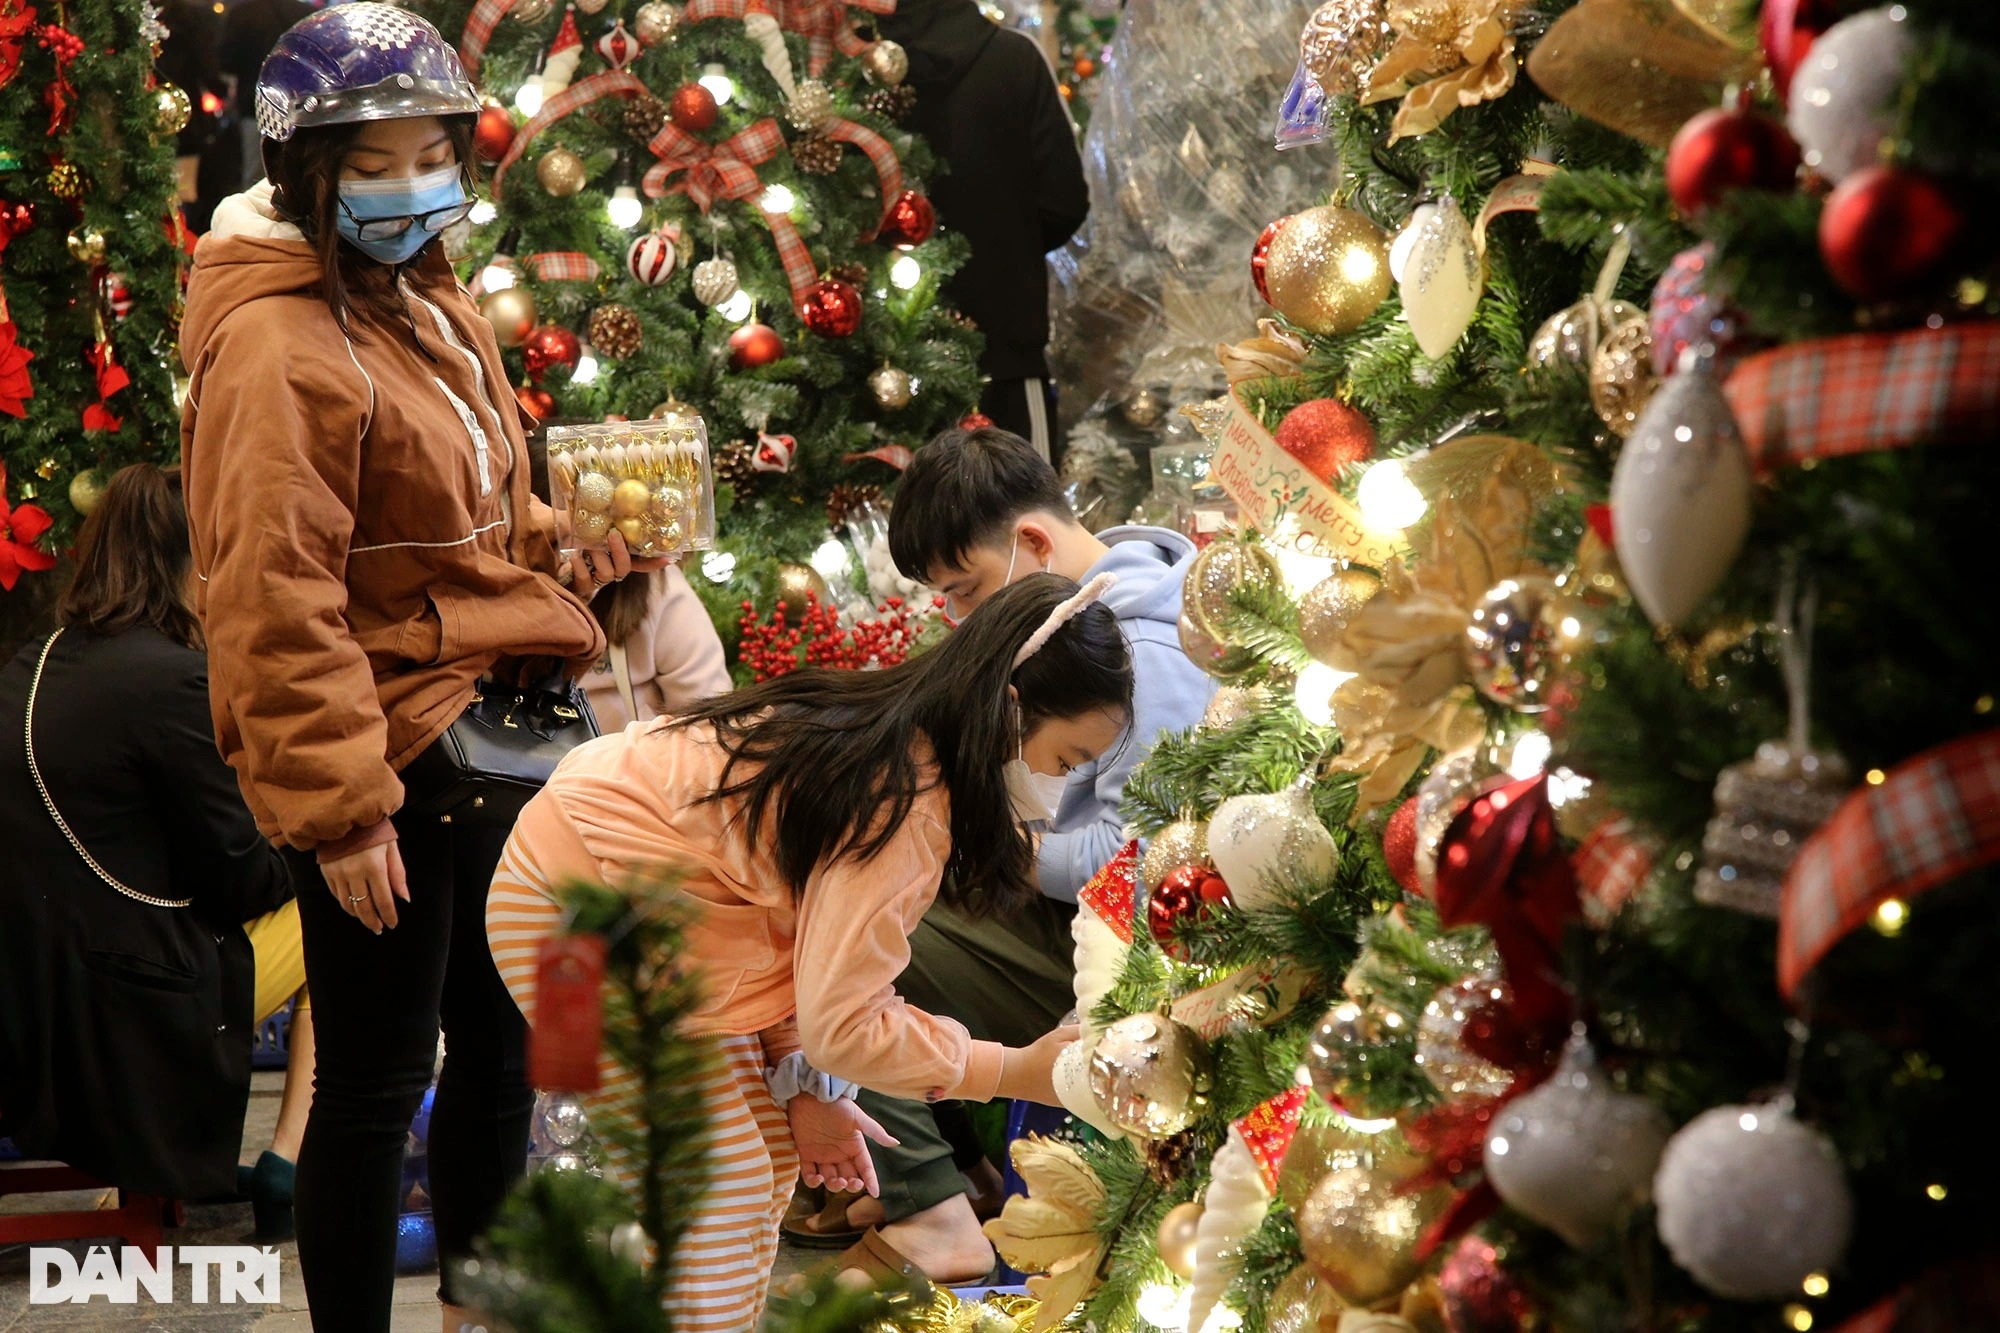 Crowds of people flock to Hang Ma to shop for Christmas 2021 - 14